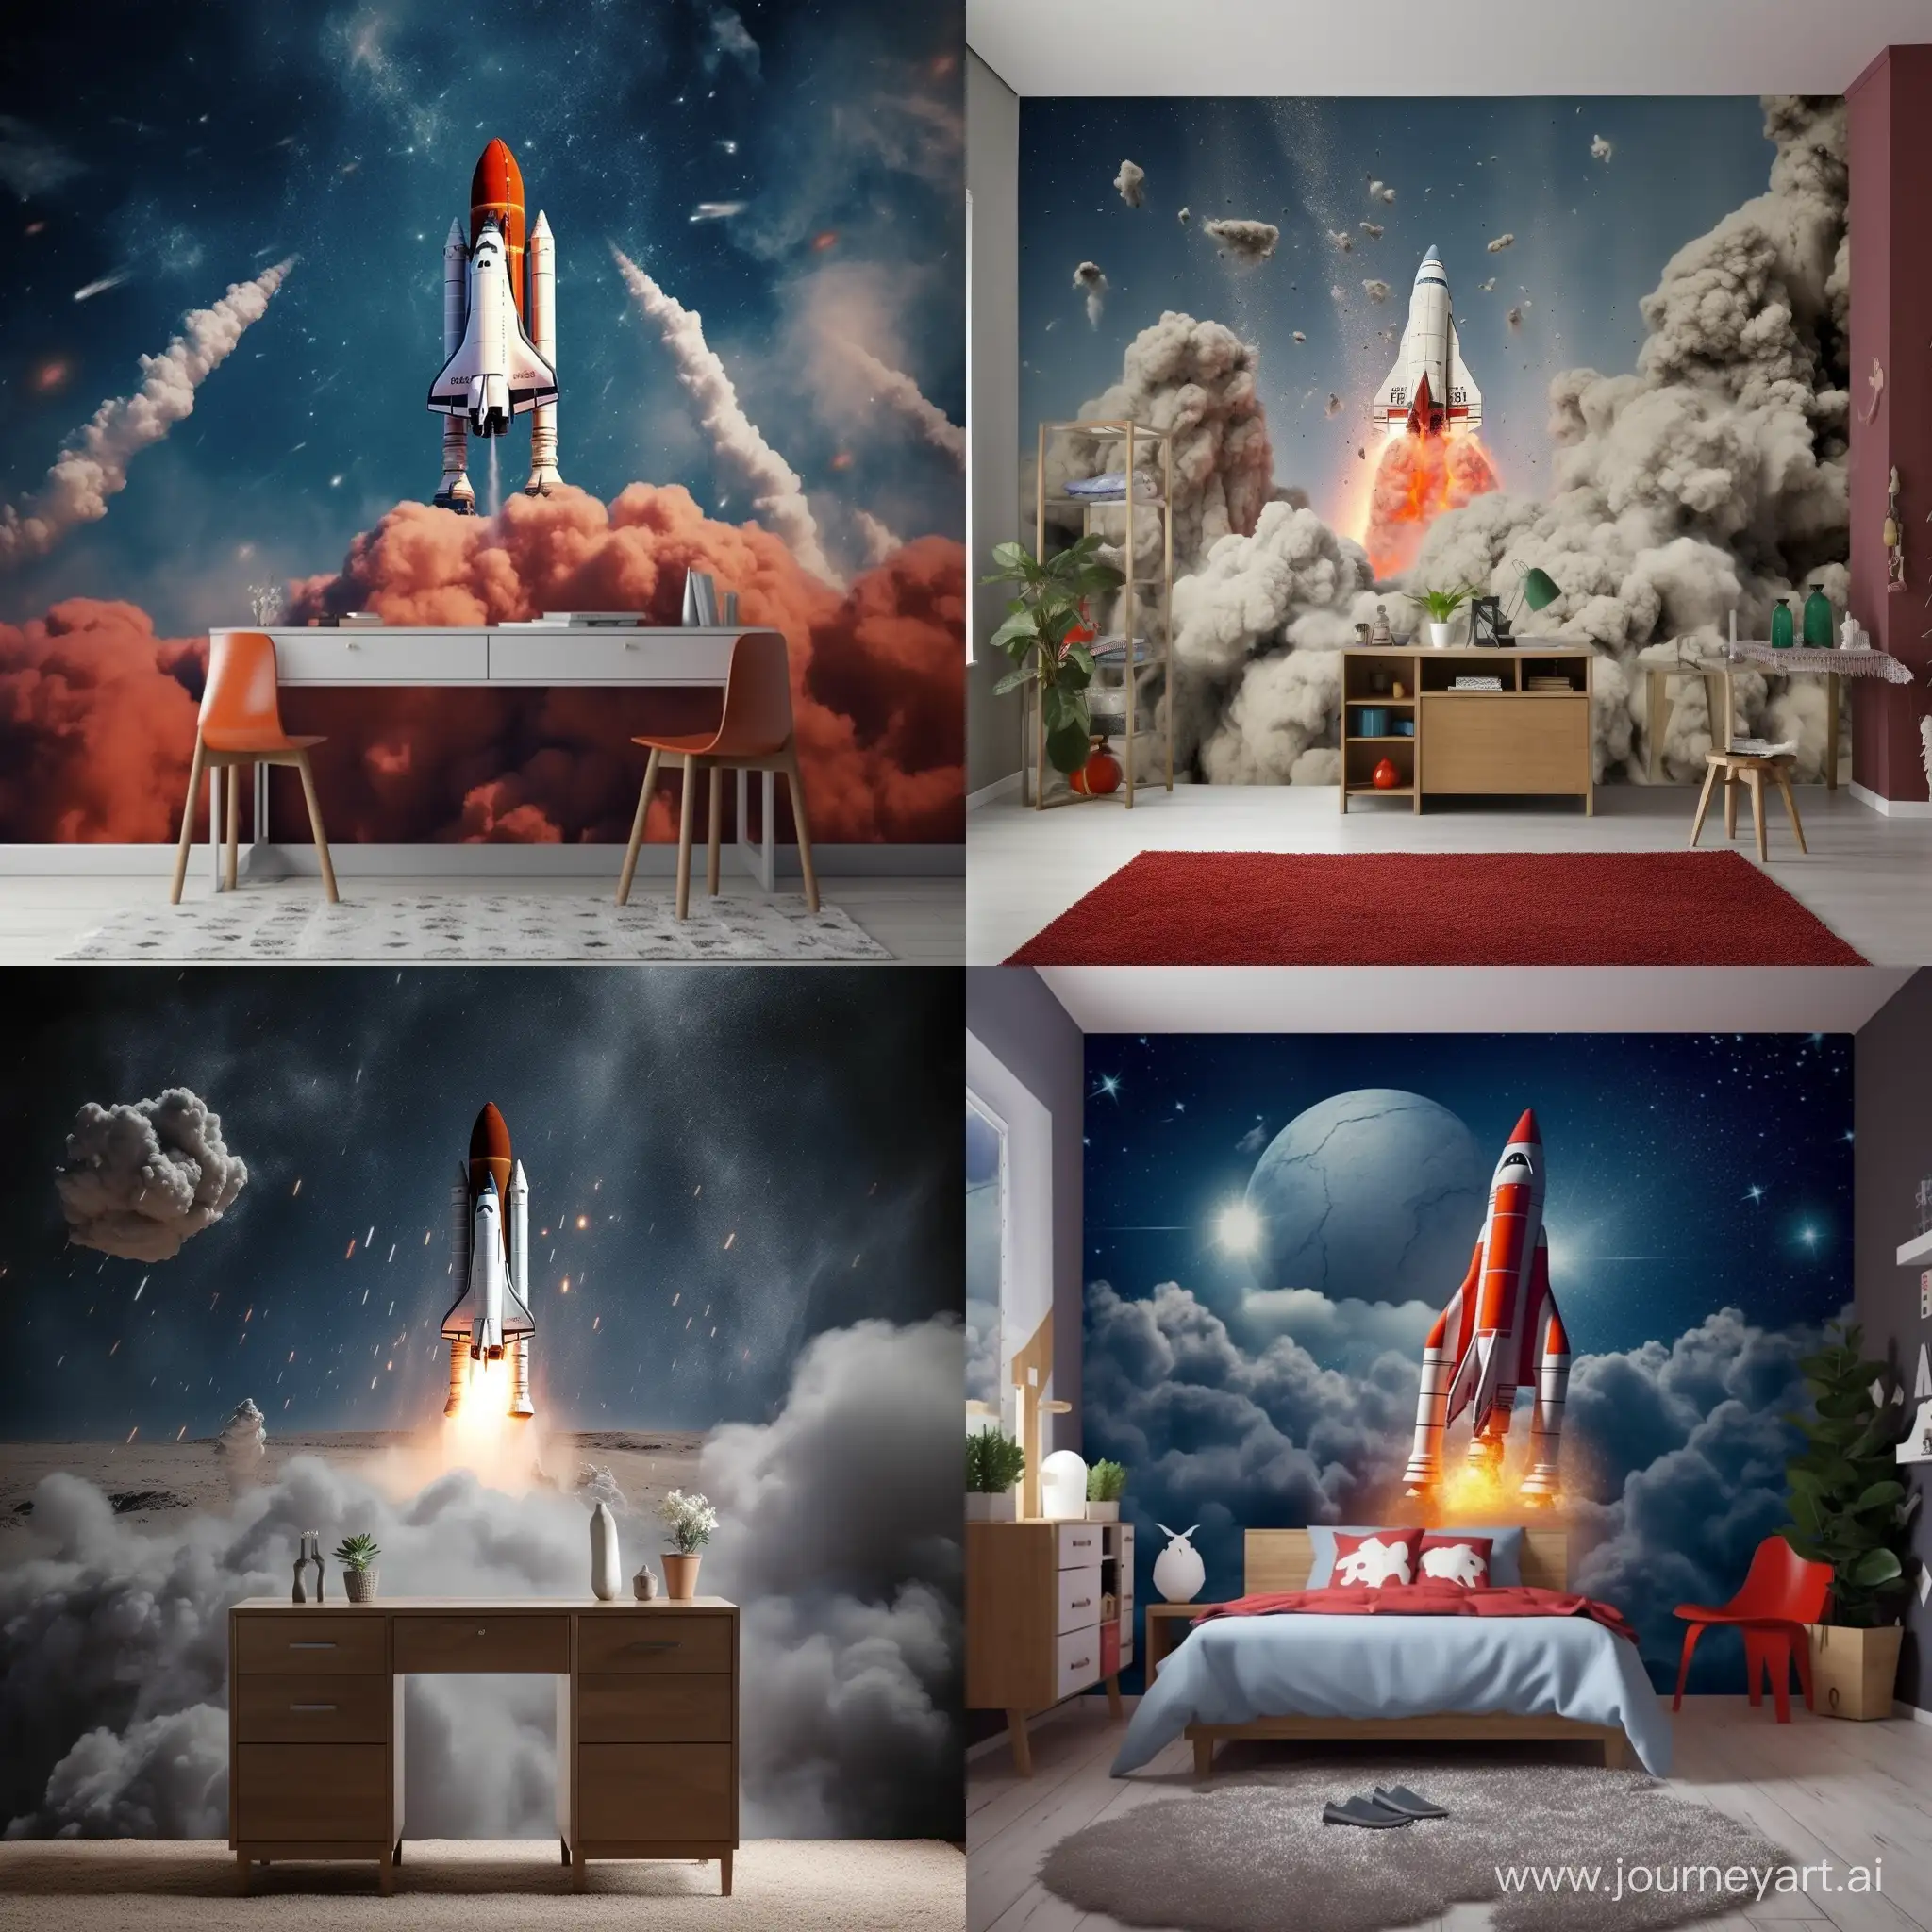 Spacethemed-Photo-Wall-with-Hidden-Rocket-Entrance